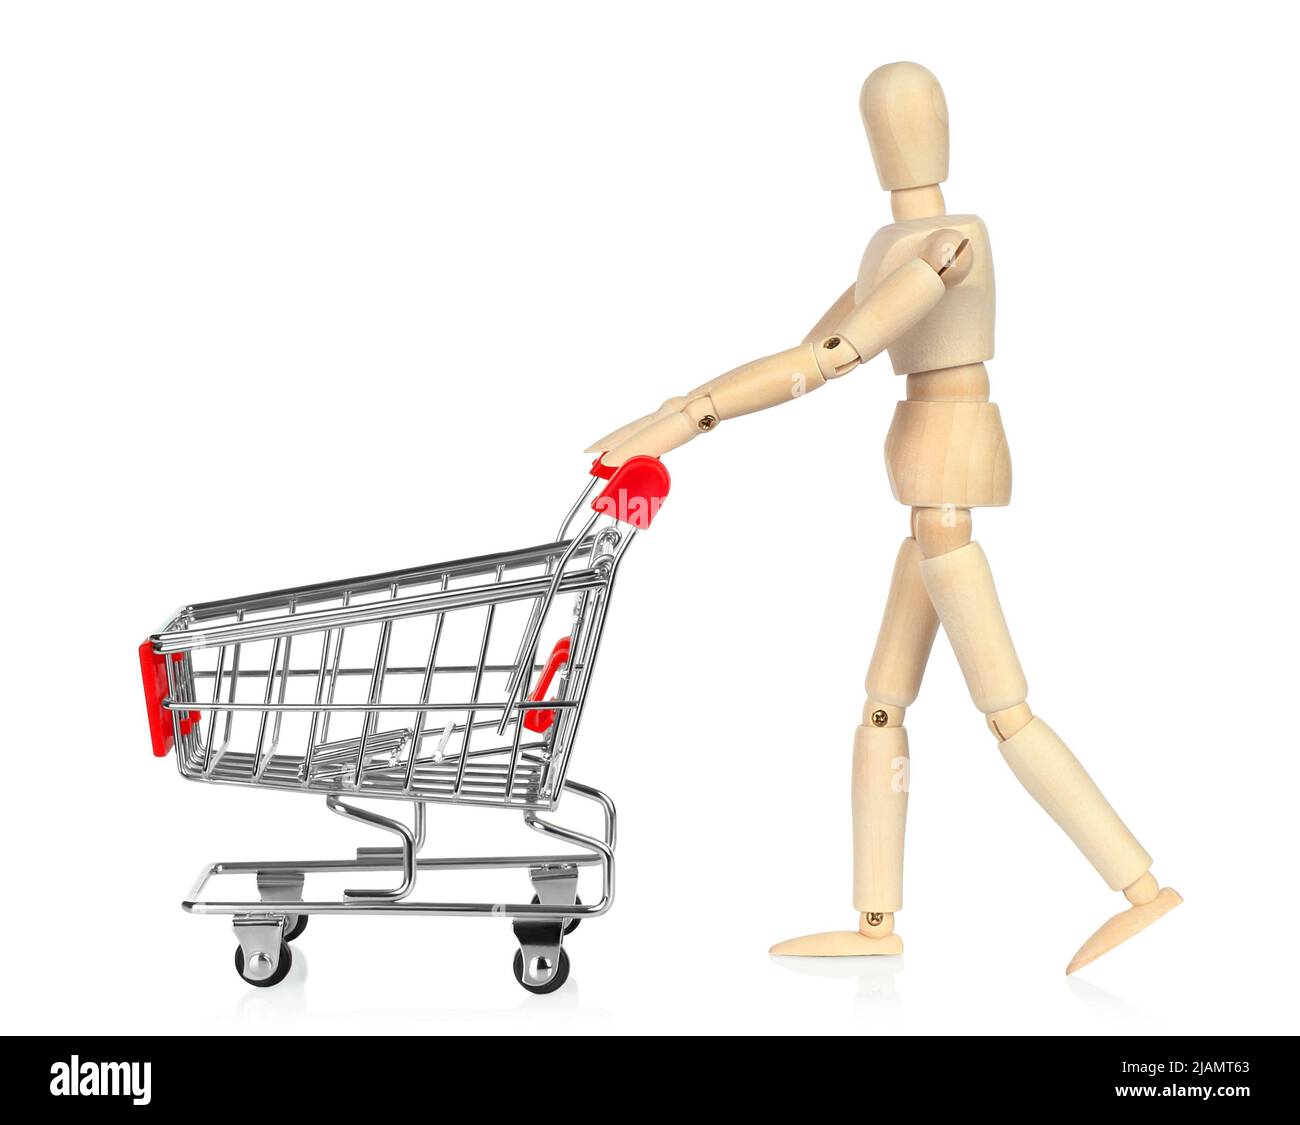 Wooden Manikin with shopping cart, shopping concept on white background close-up Stock Photo